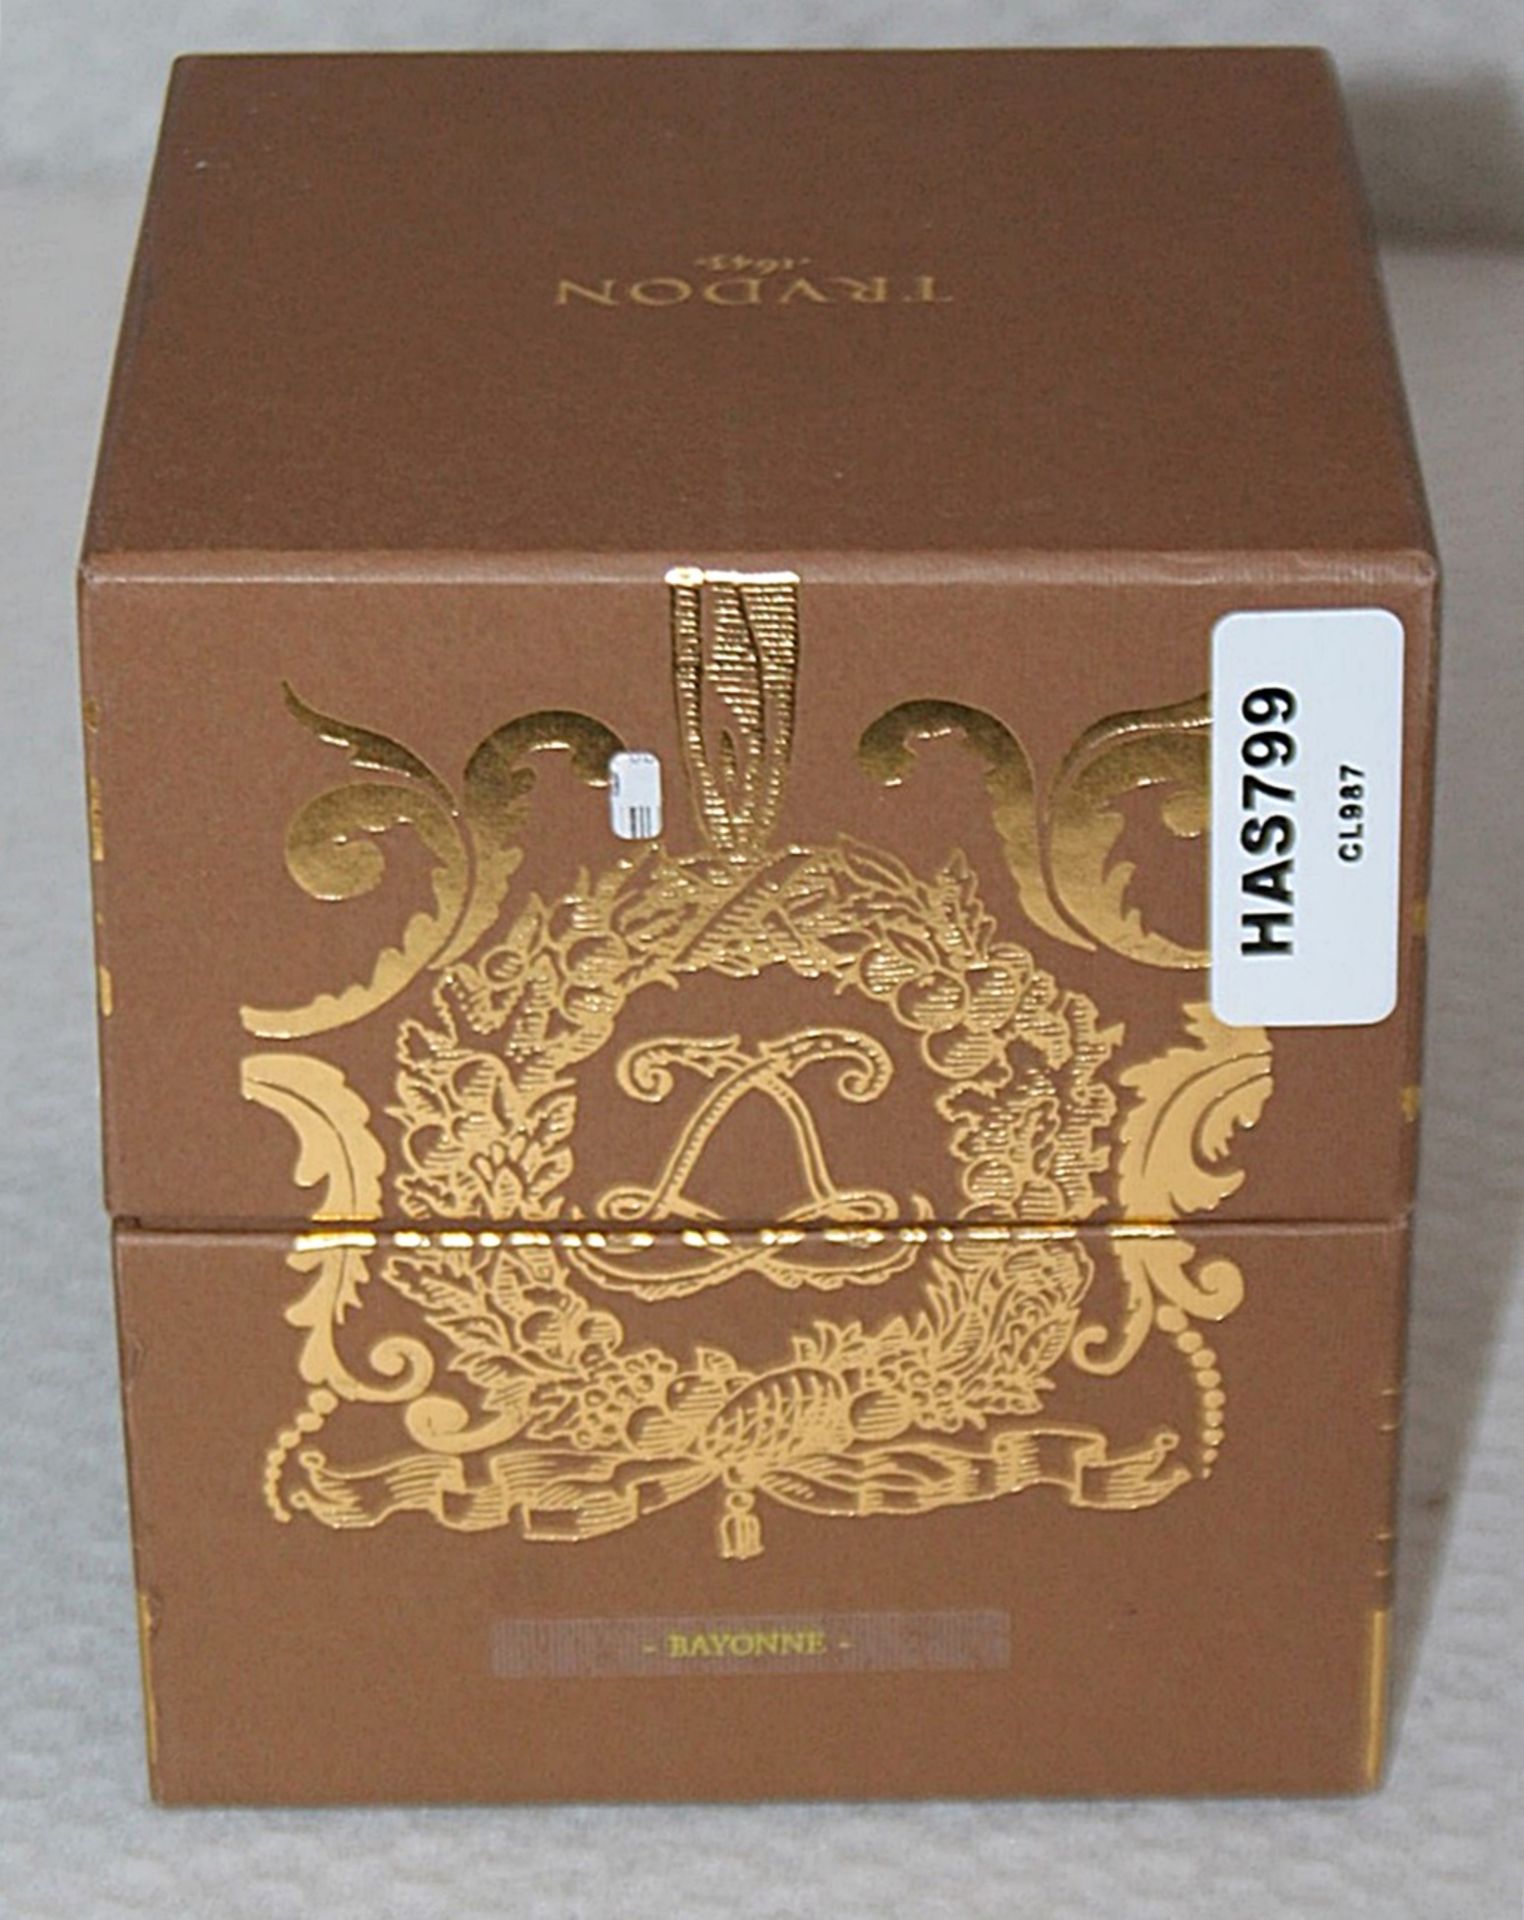 1 x TRUDON Les Belles Matières Reggio Scented Candle (800g) - Made in France - Original Price £230 - Image 4 of 9